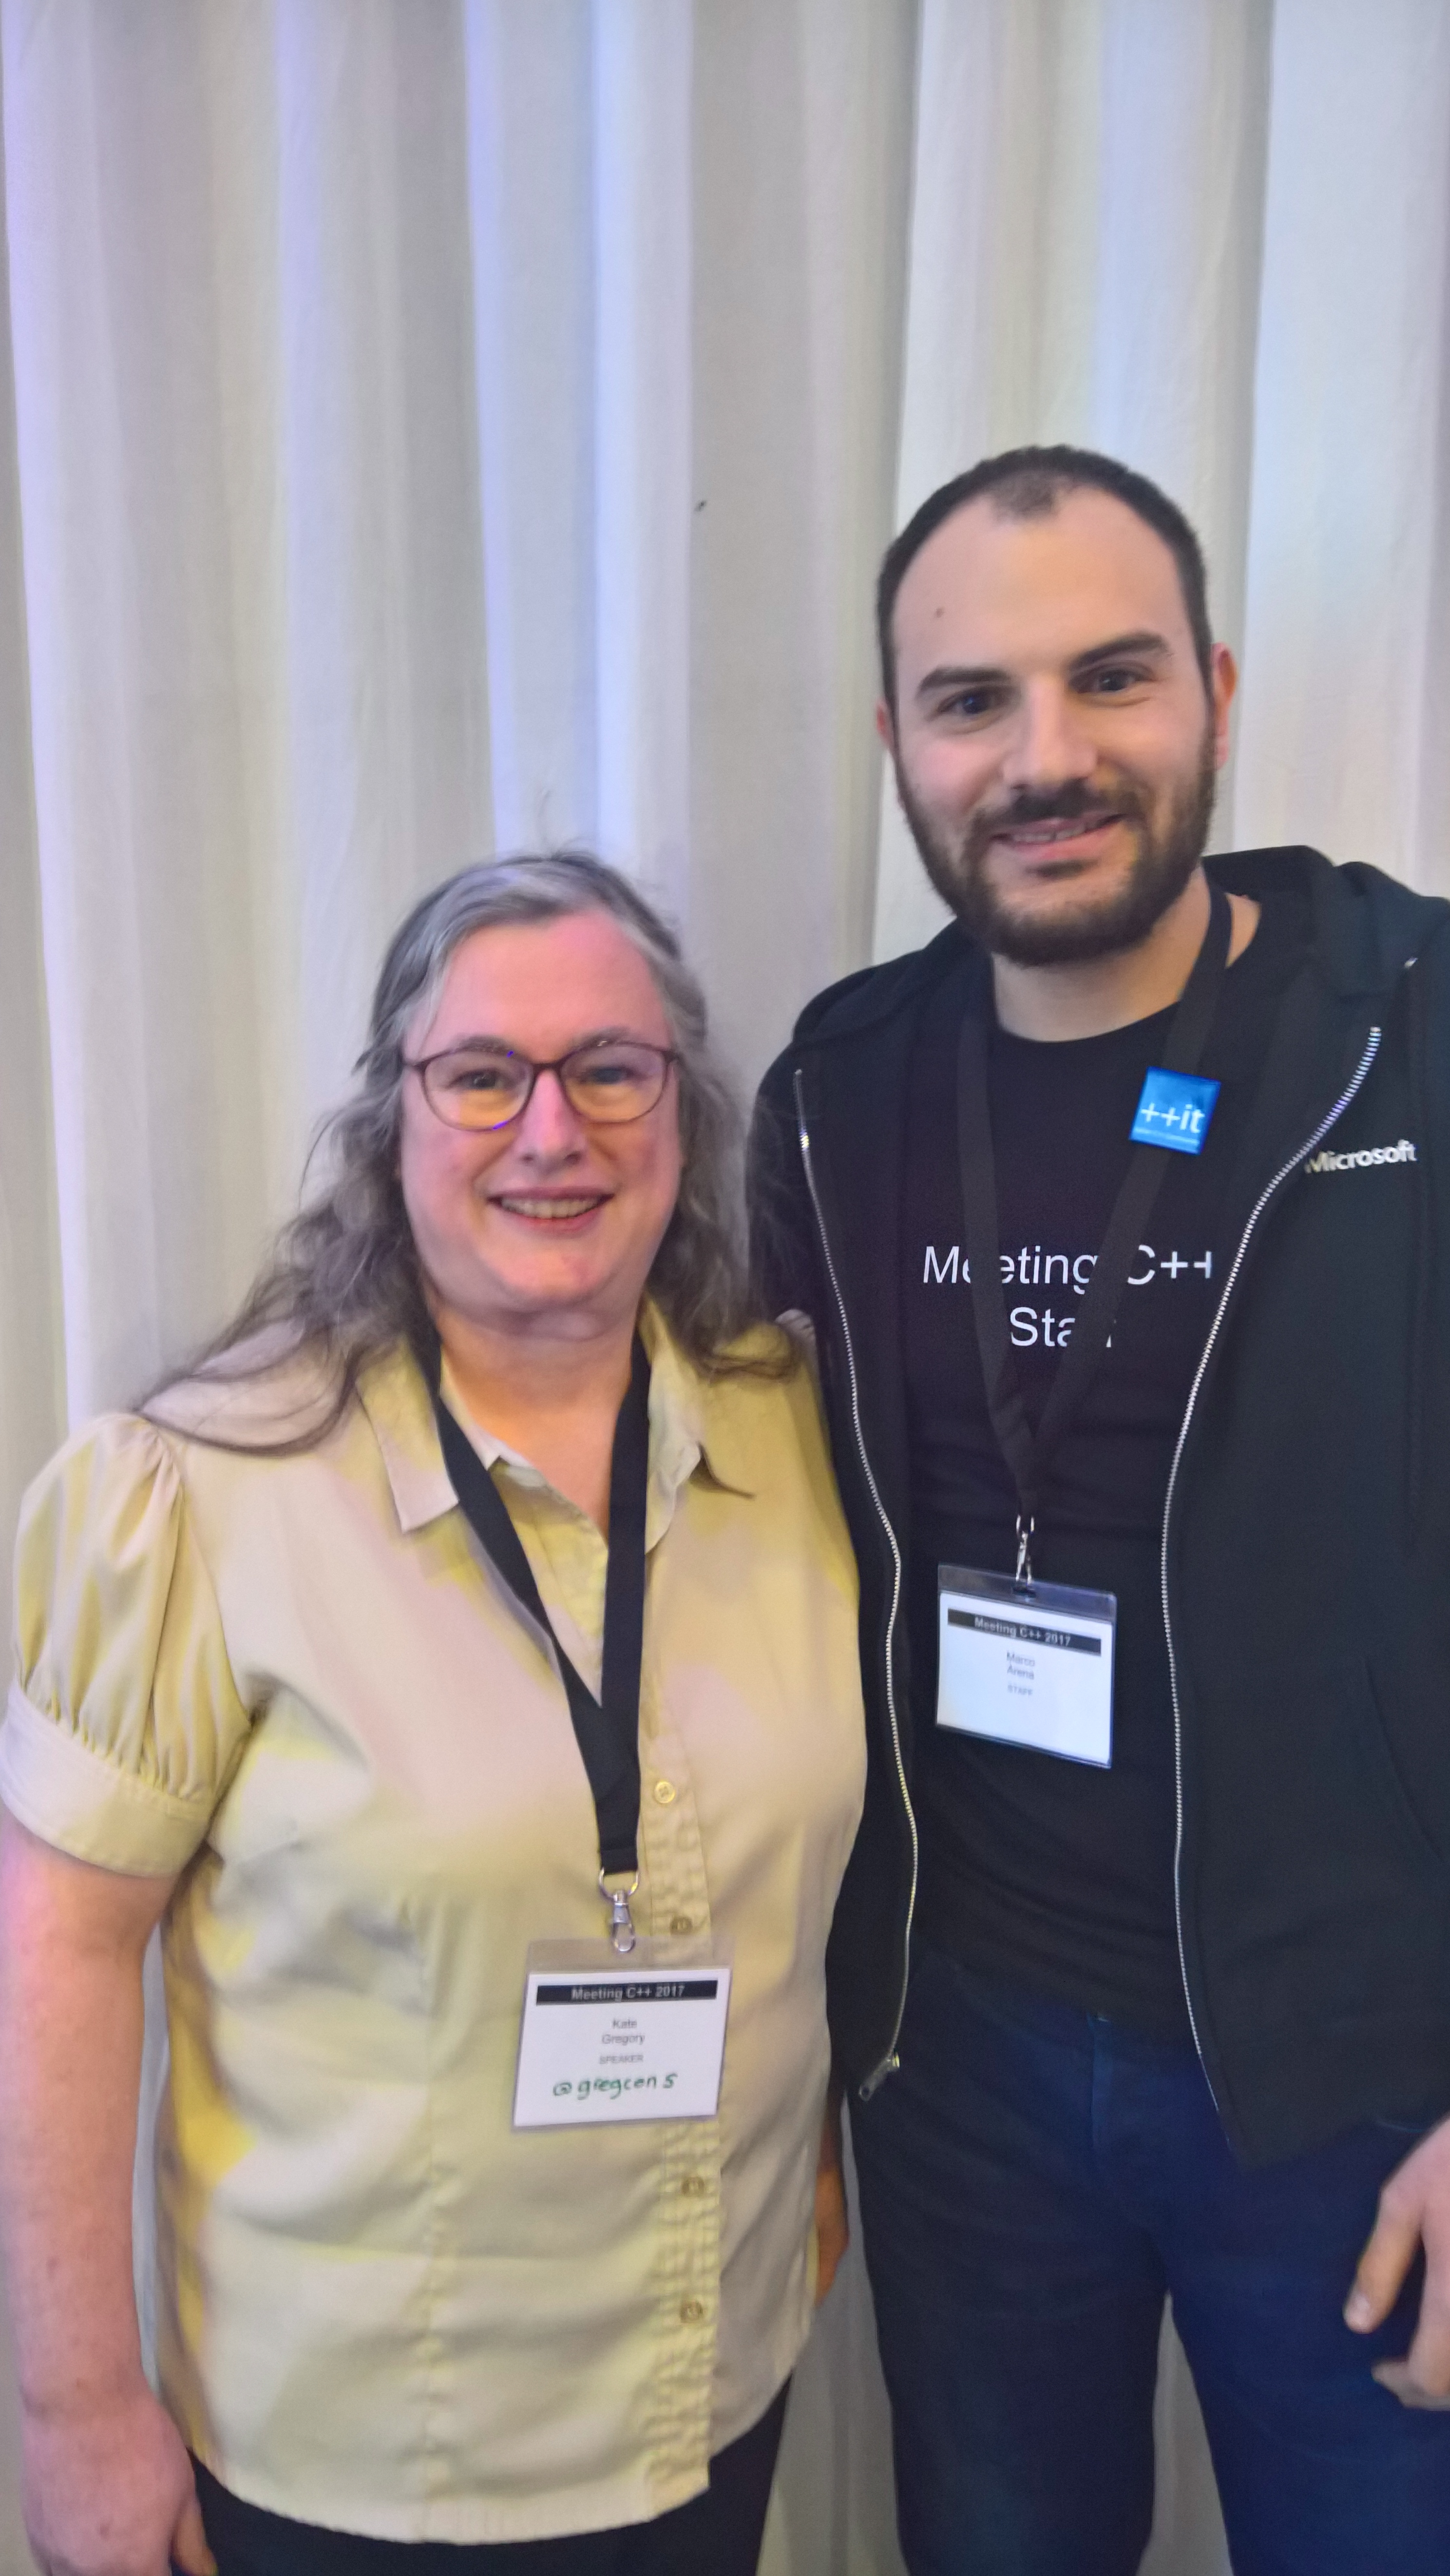 Con Kate Gregory a Meeting C++ 2017